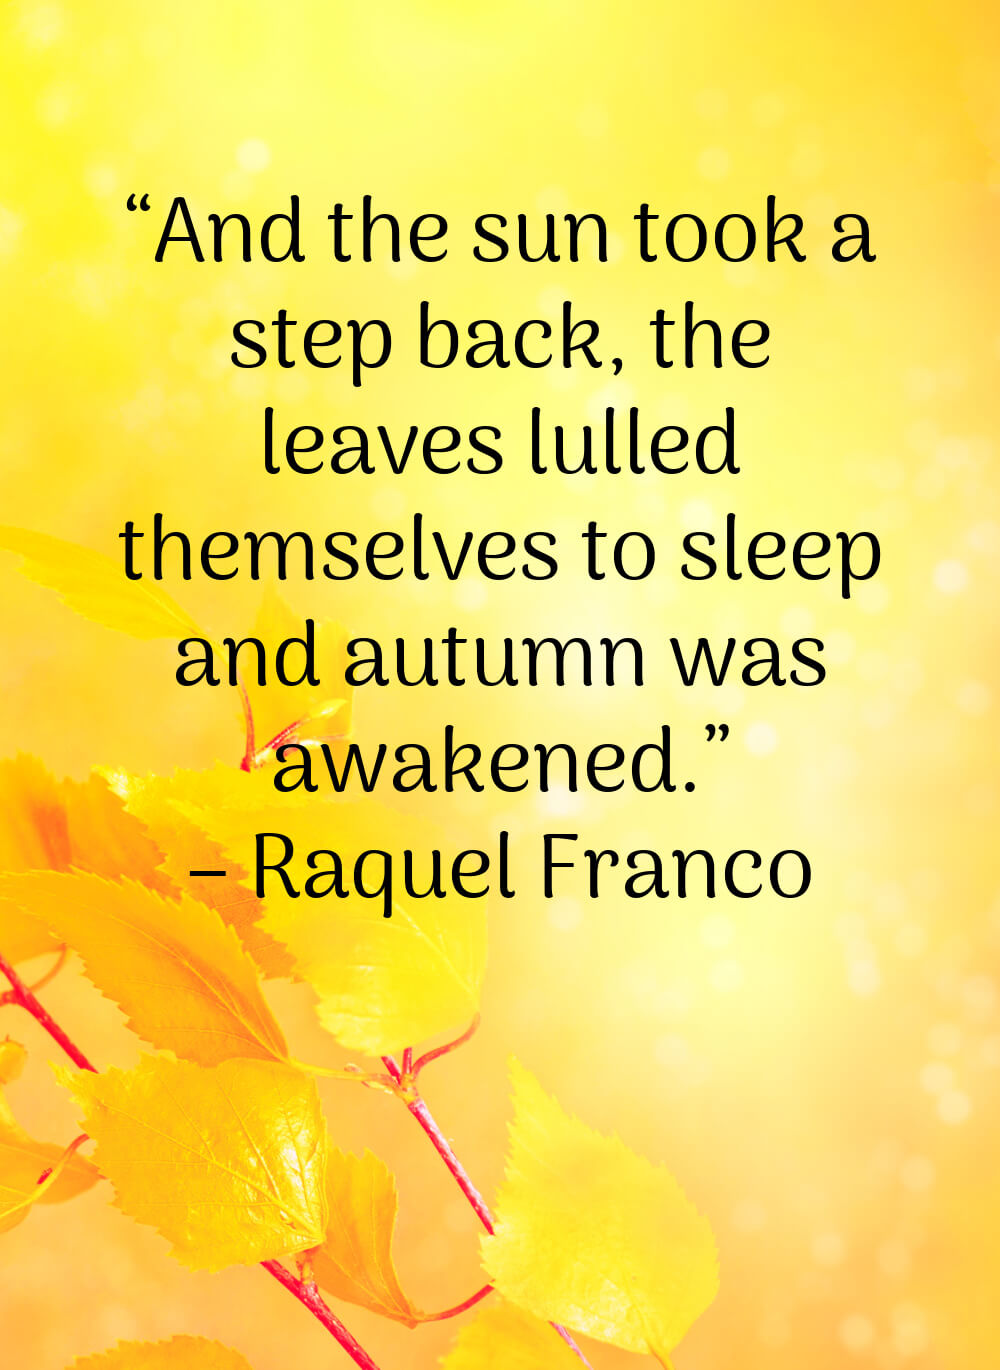 A quote about autumn